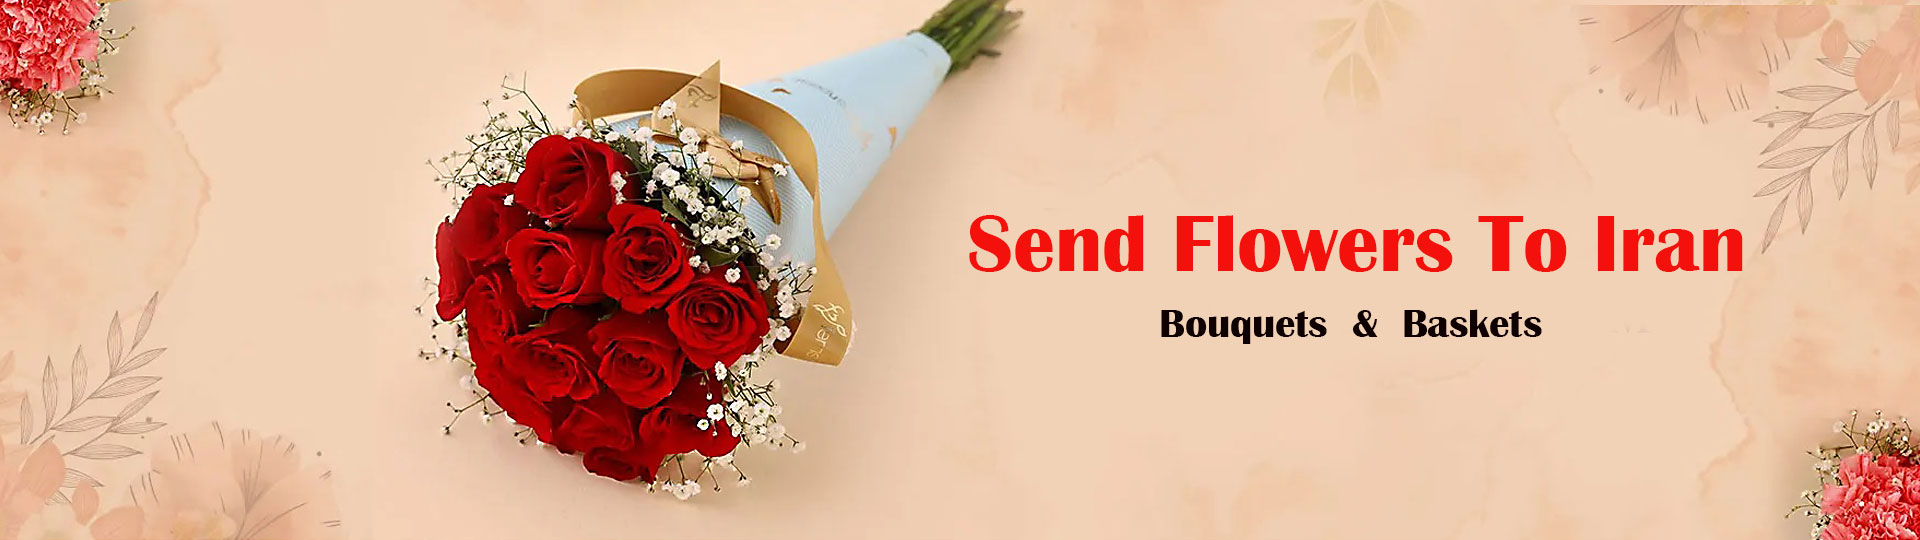 Send flower and gifts to Iran